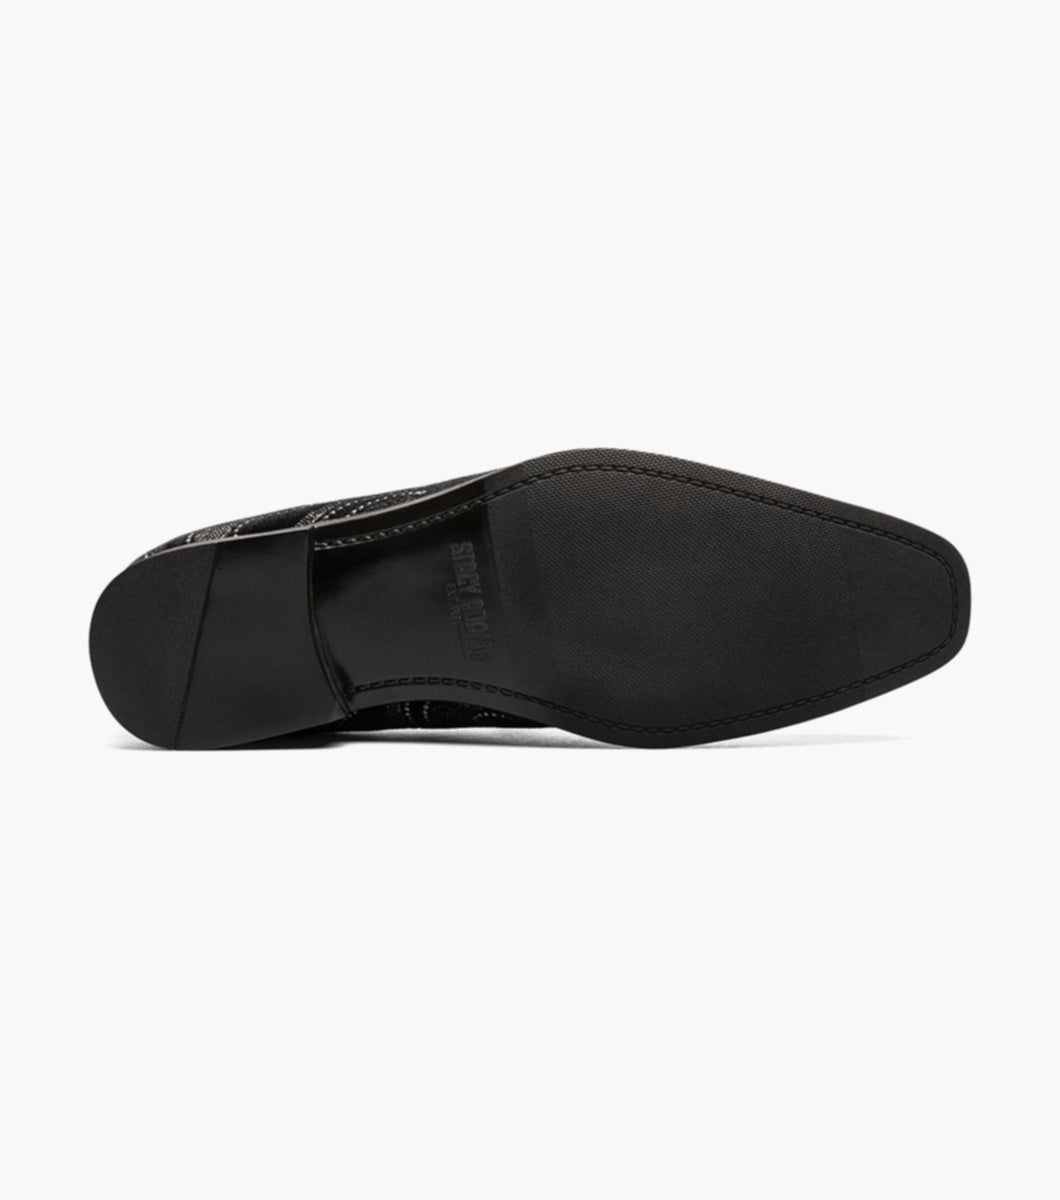 Stacy Adams Swainson Plain Toe Embroidered Slip On in Black/Silver